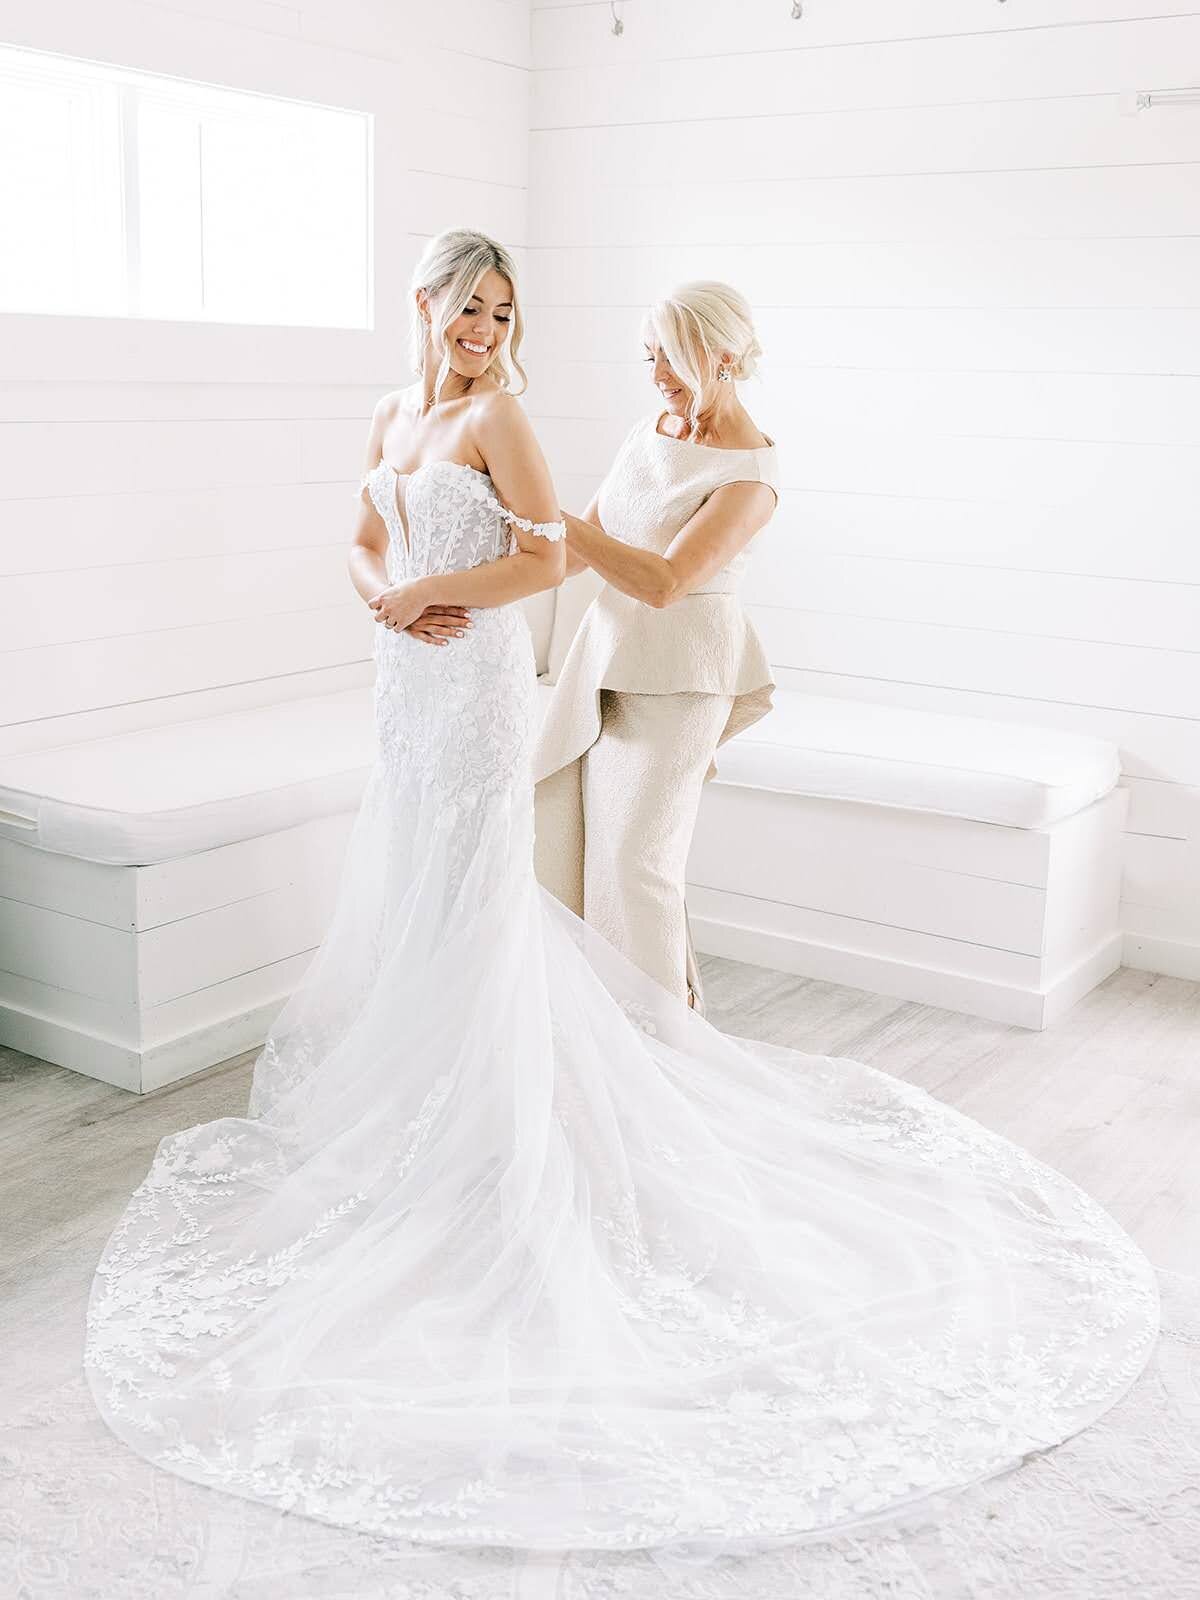 Mother of bride helps her get into her wedding gown on her wedding day